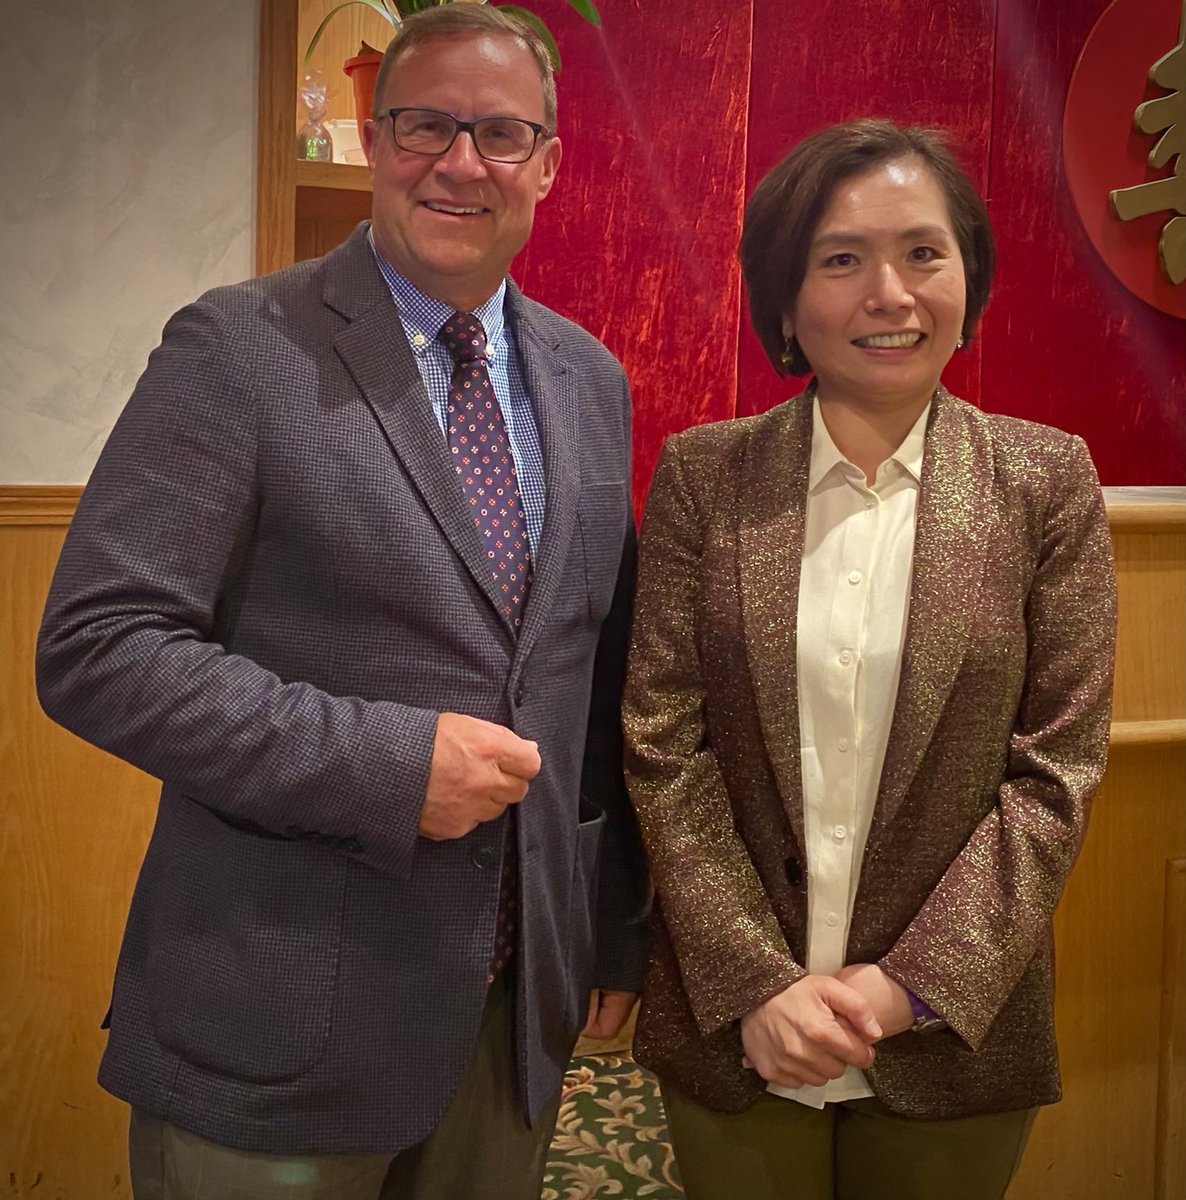 In Saskatoon tonight, honoured to meet Consul General Lihsin Angel Liu, of the Taipei Economic & Cultural Office responsible for Saskatchewan. Talking about Saskatchewan’s economy and long standing academic, cultural and business linkages with Taiwan.